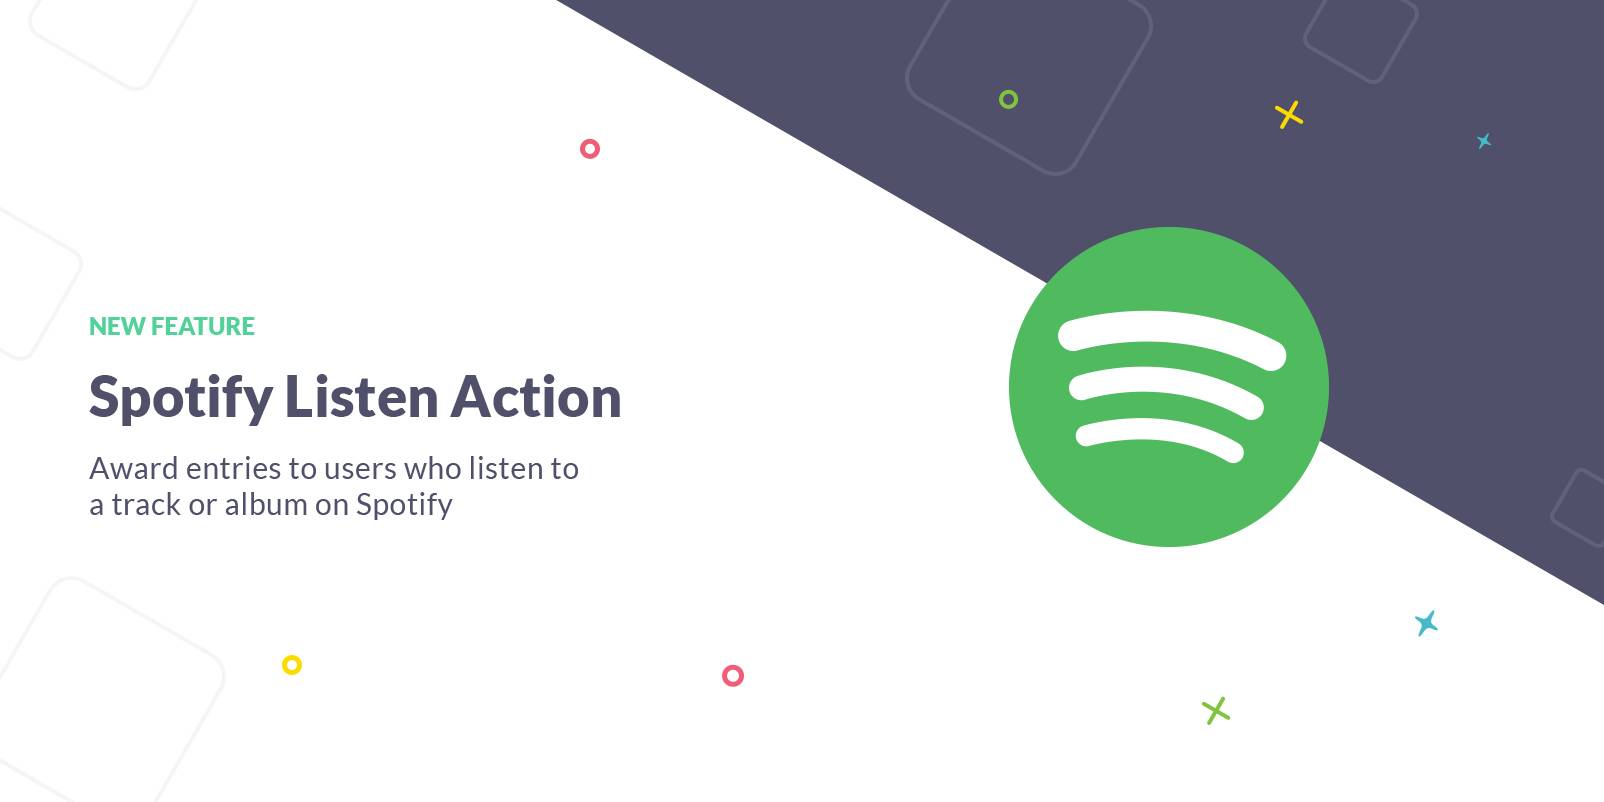 New Feature: Spotify Listen Action for Gleam